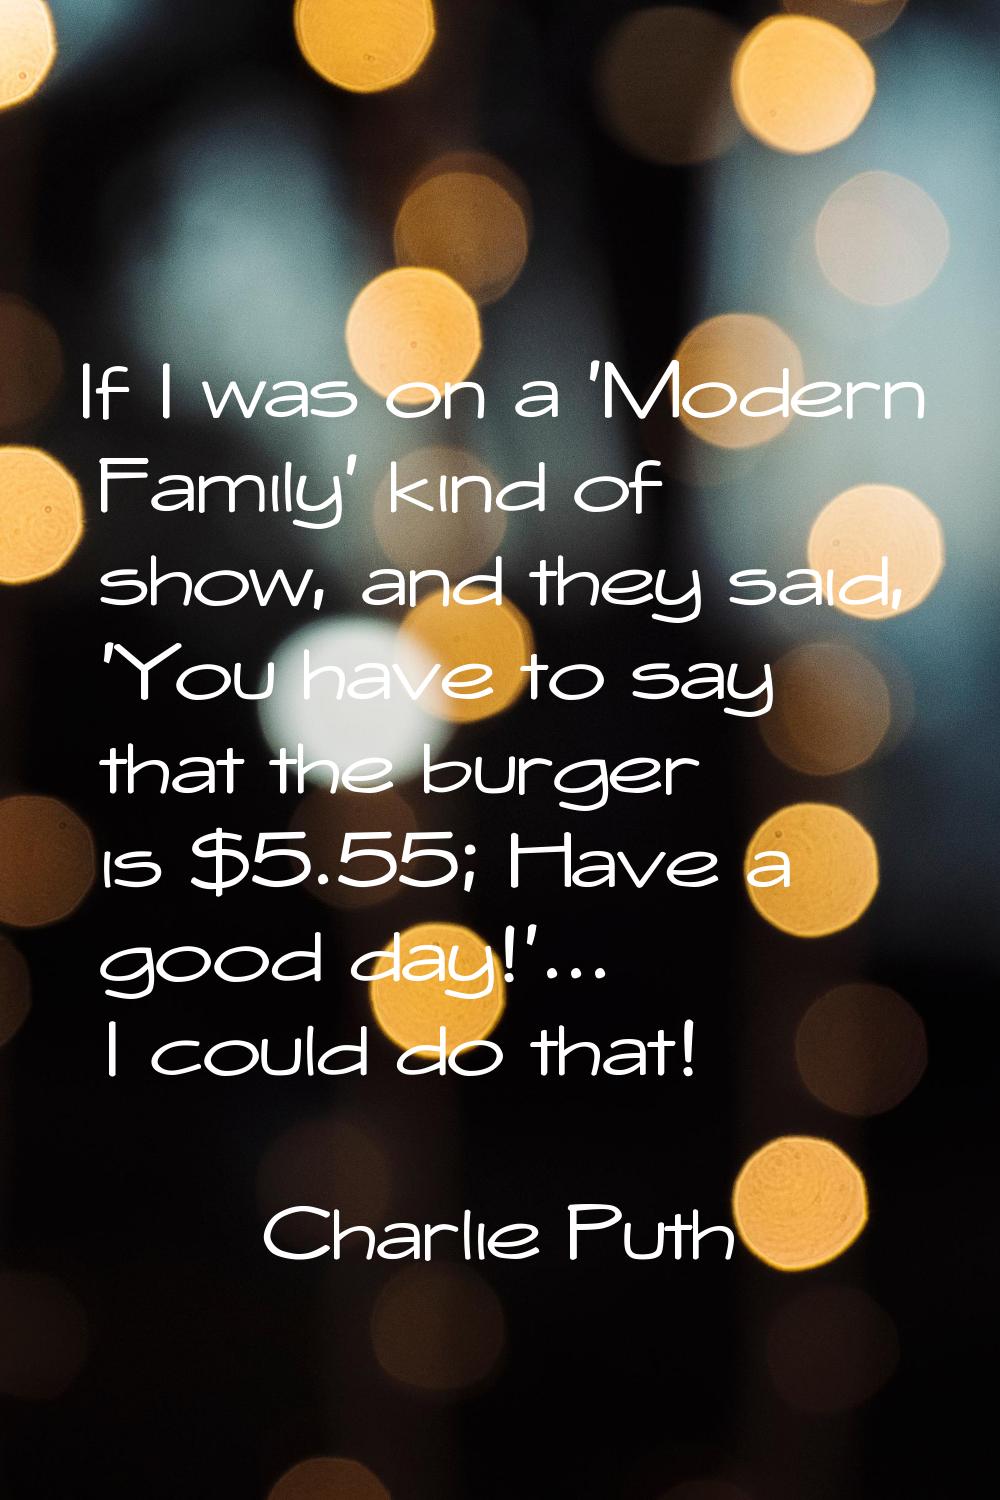 If I was on a 'Modern Family' kind of show, and they said, 'You have to say that the burger is $5.5